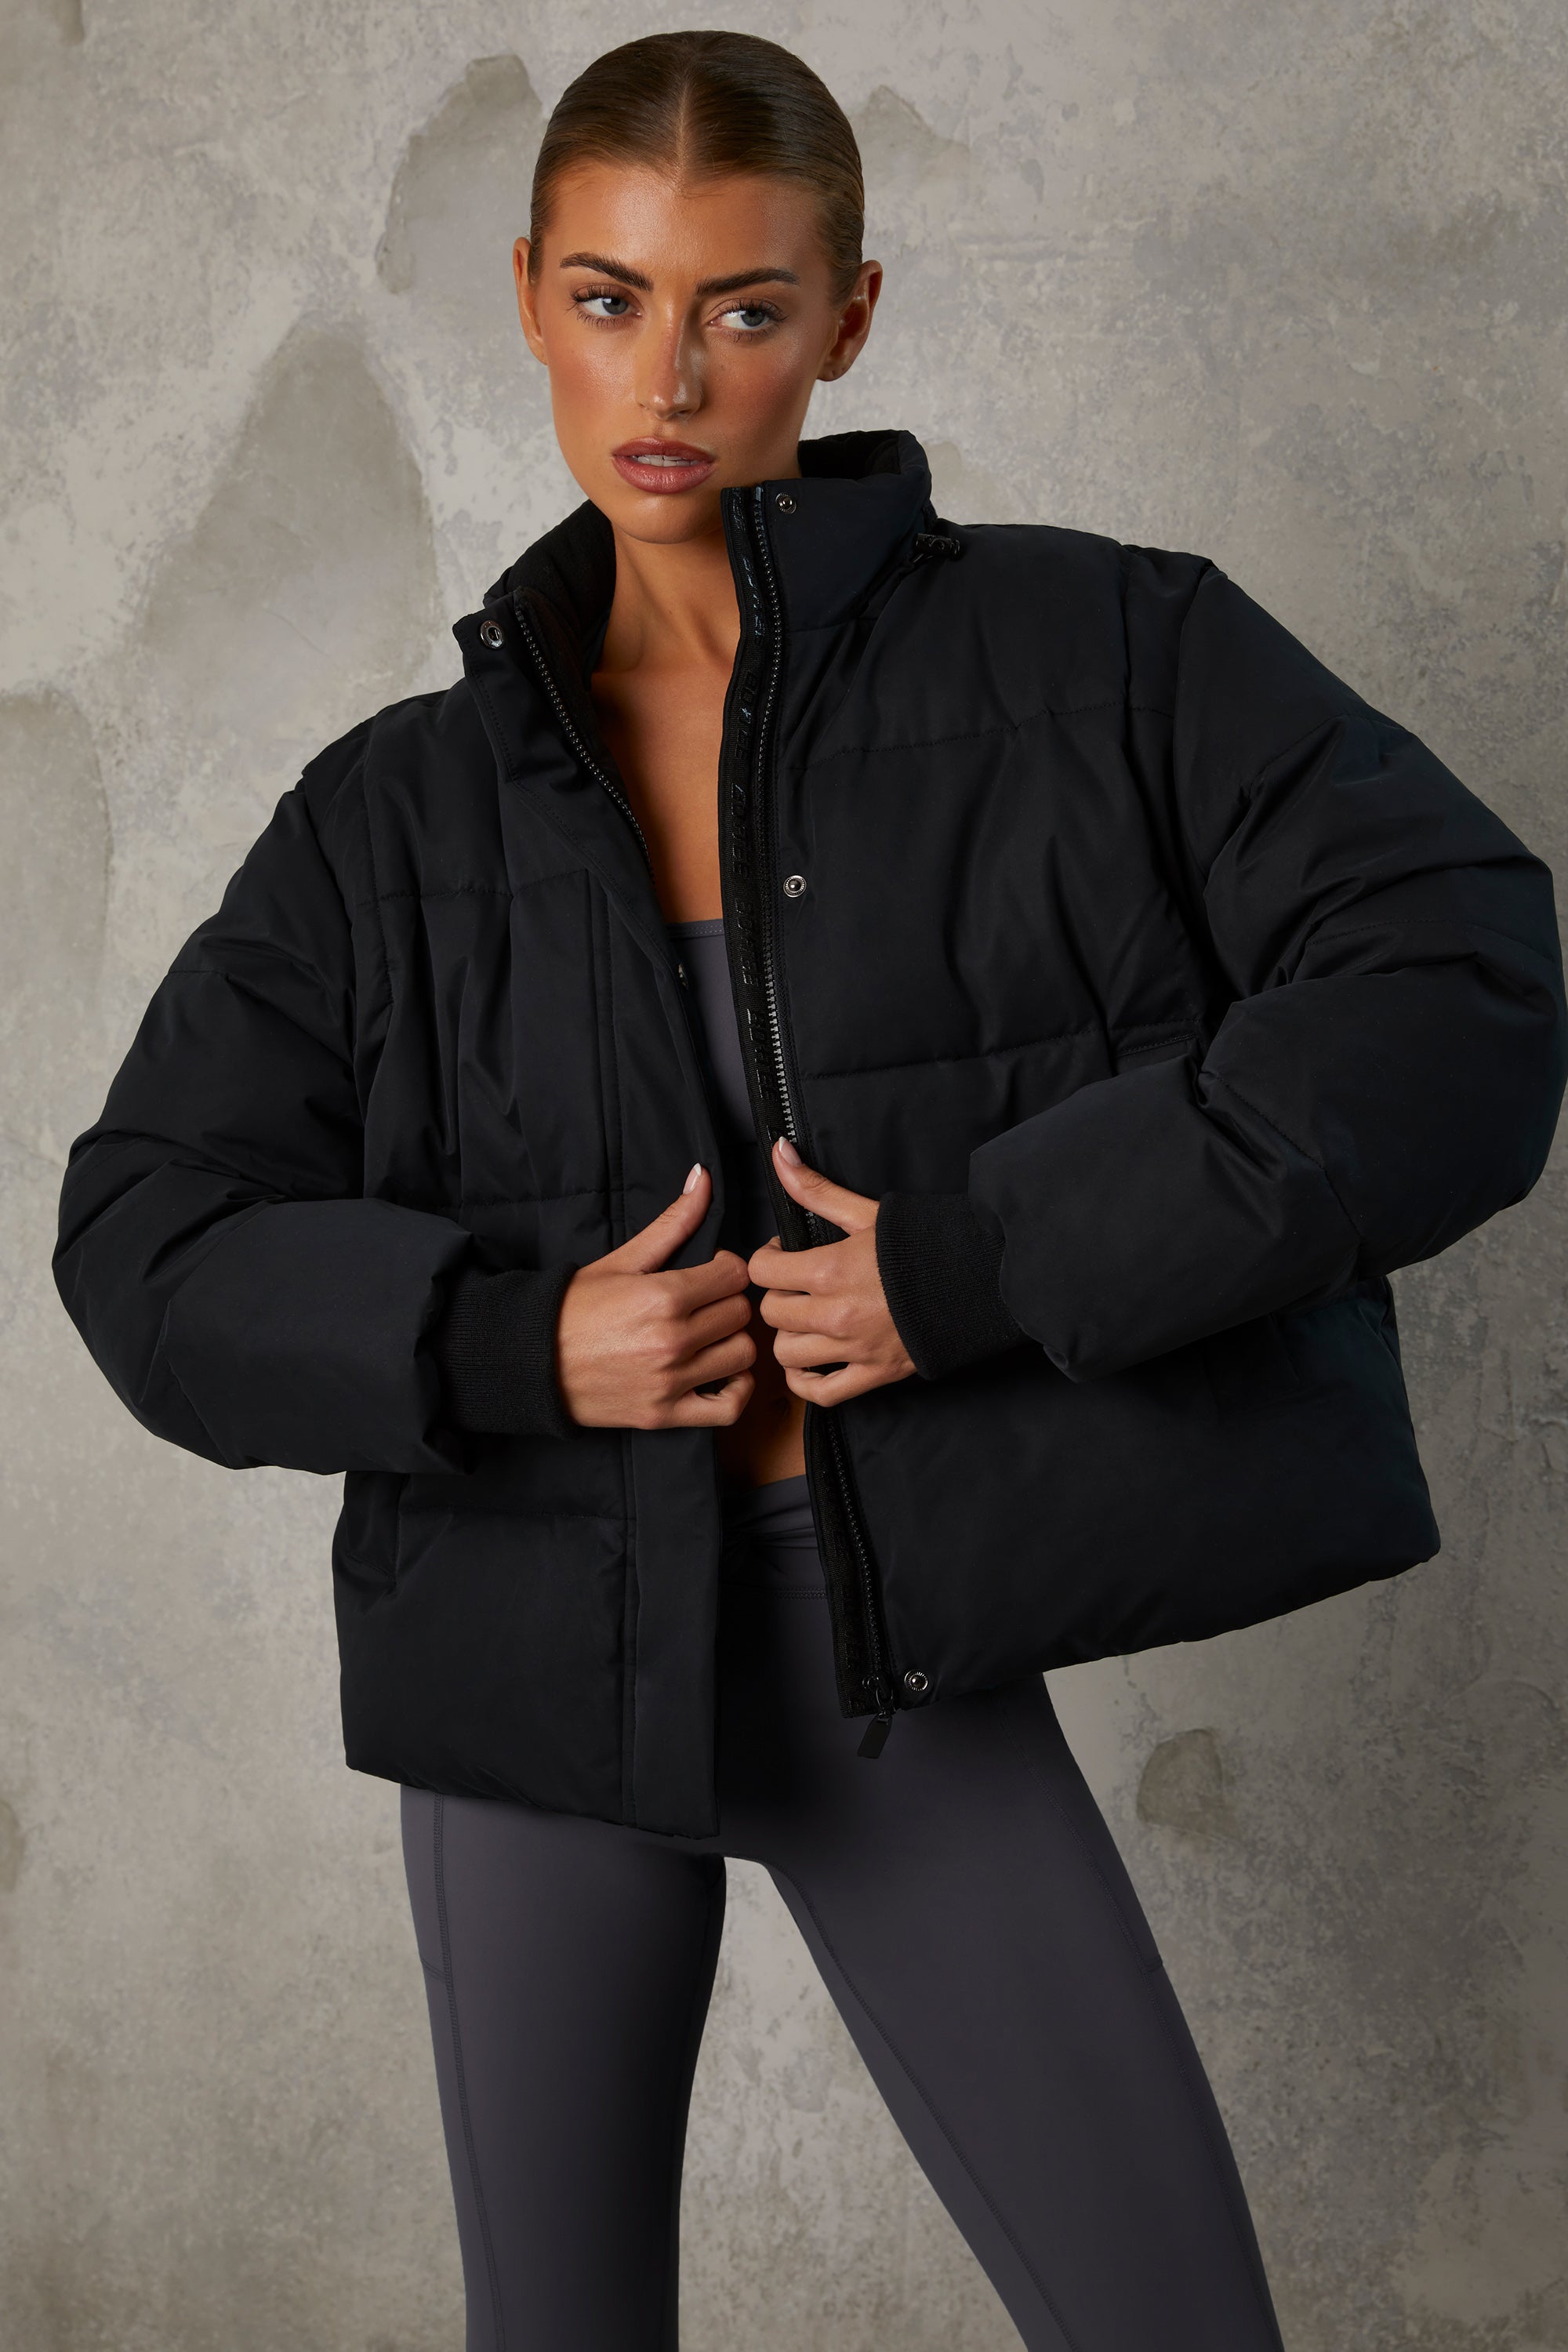 Black Hooded Cropped Puffer, Coats & Jackets